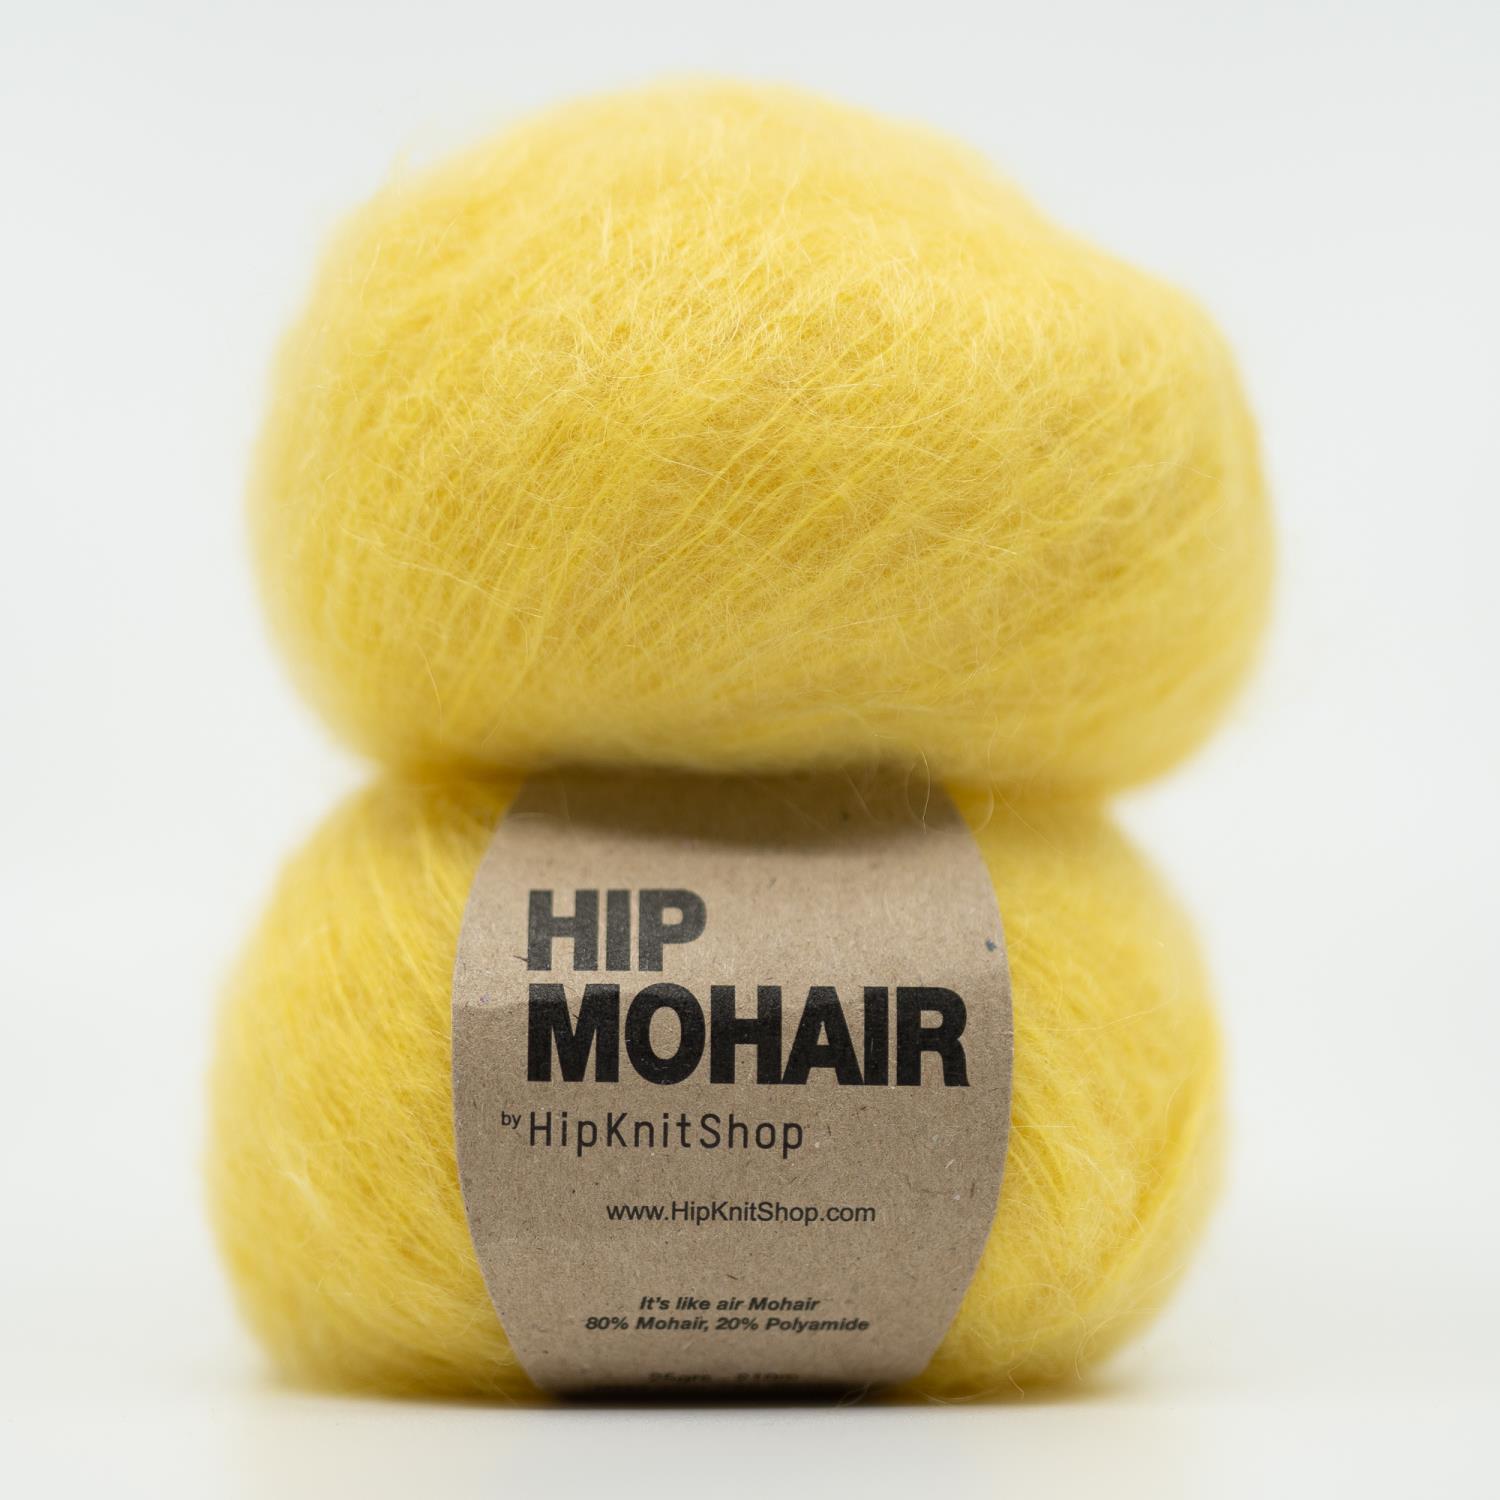 Hip Mohair - Here comes the sun